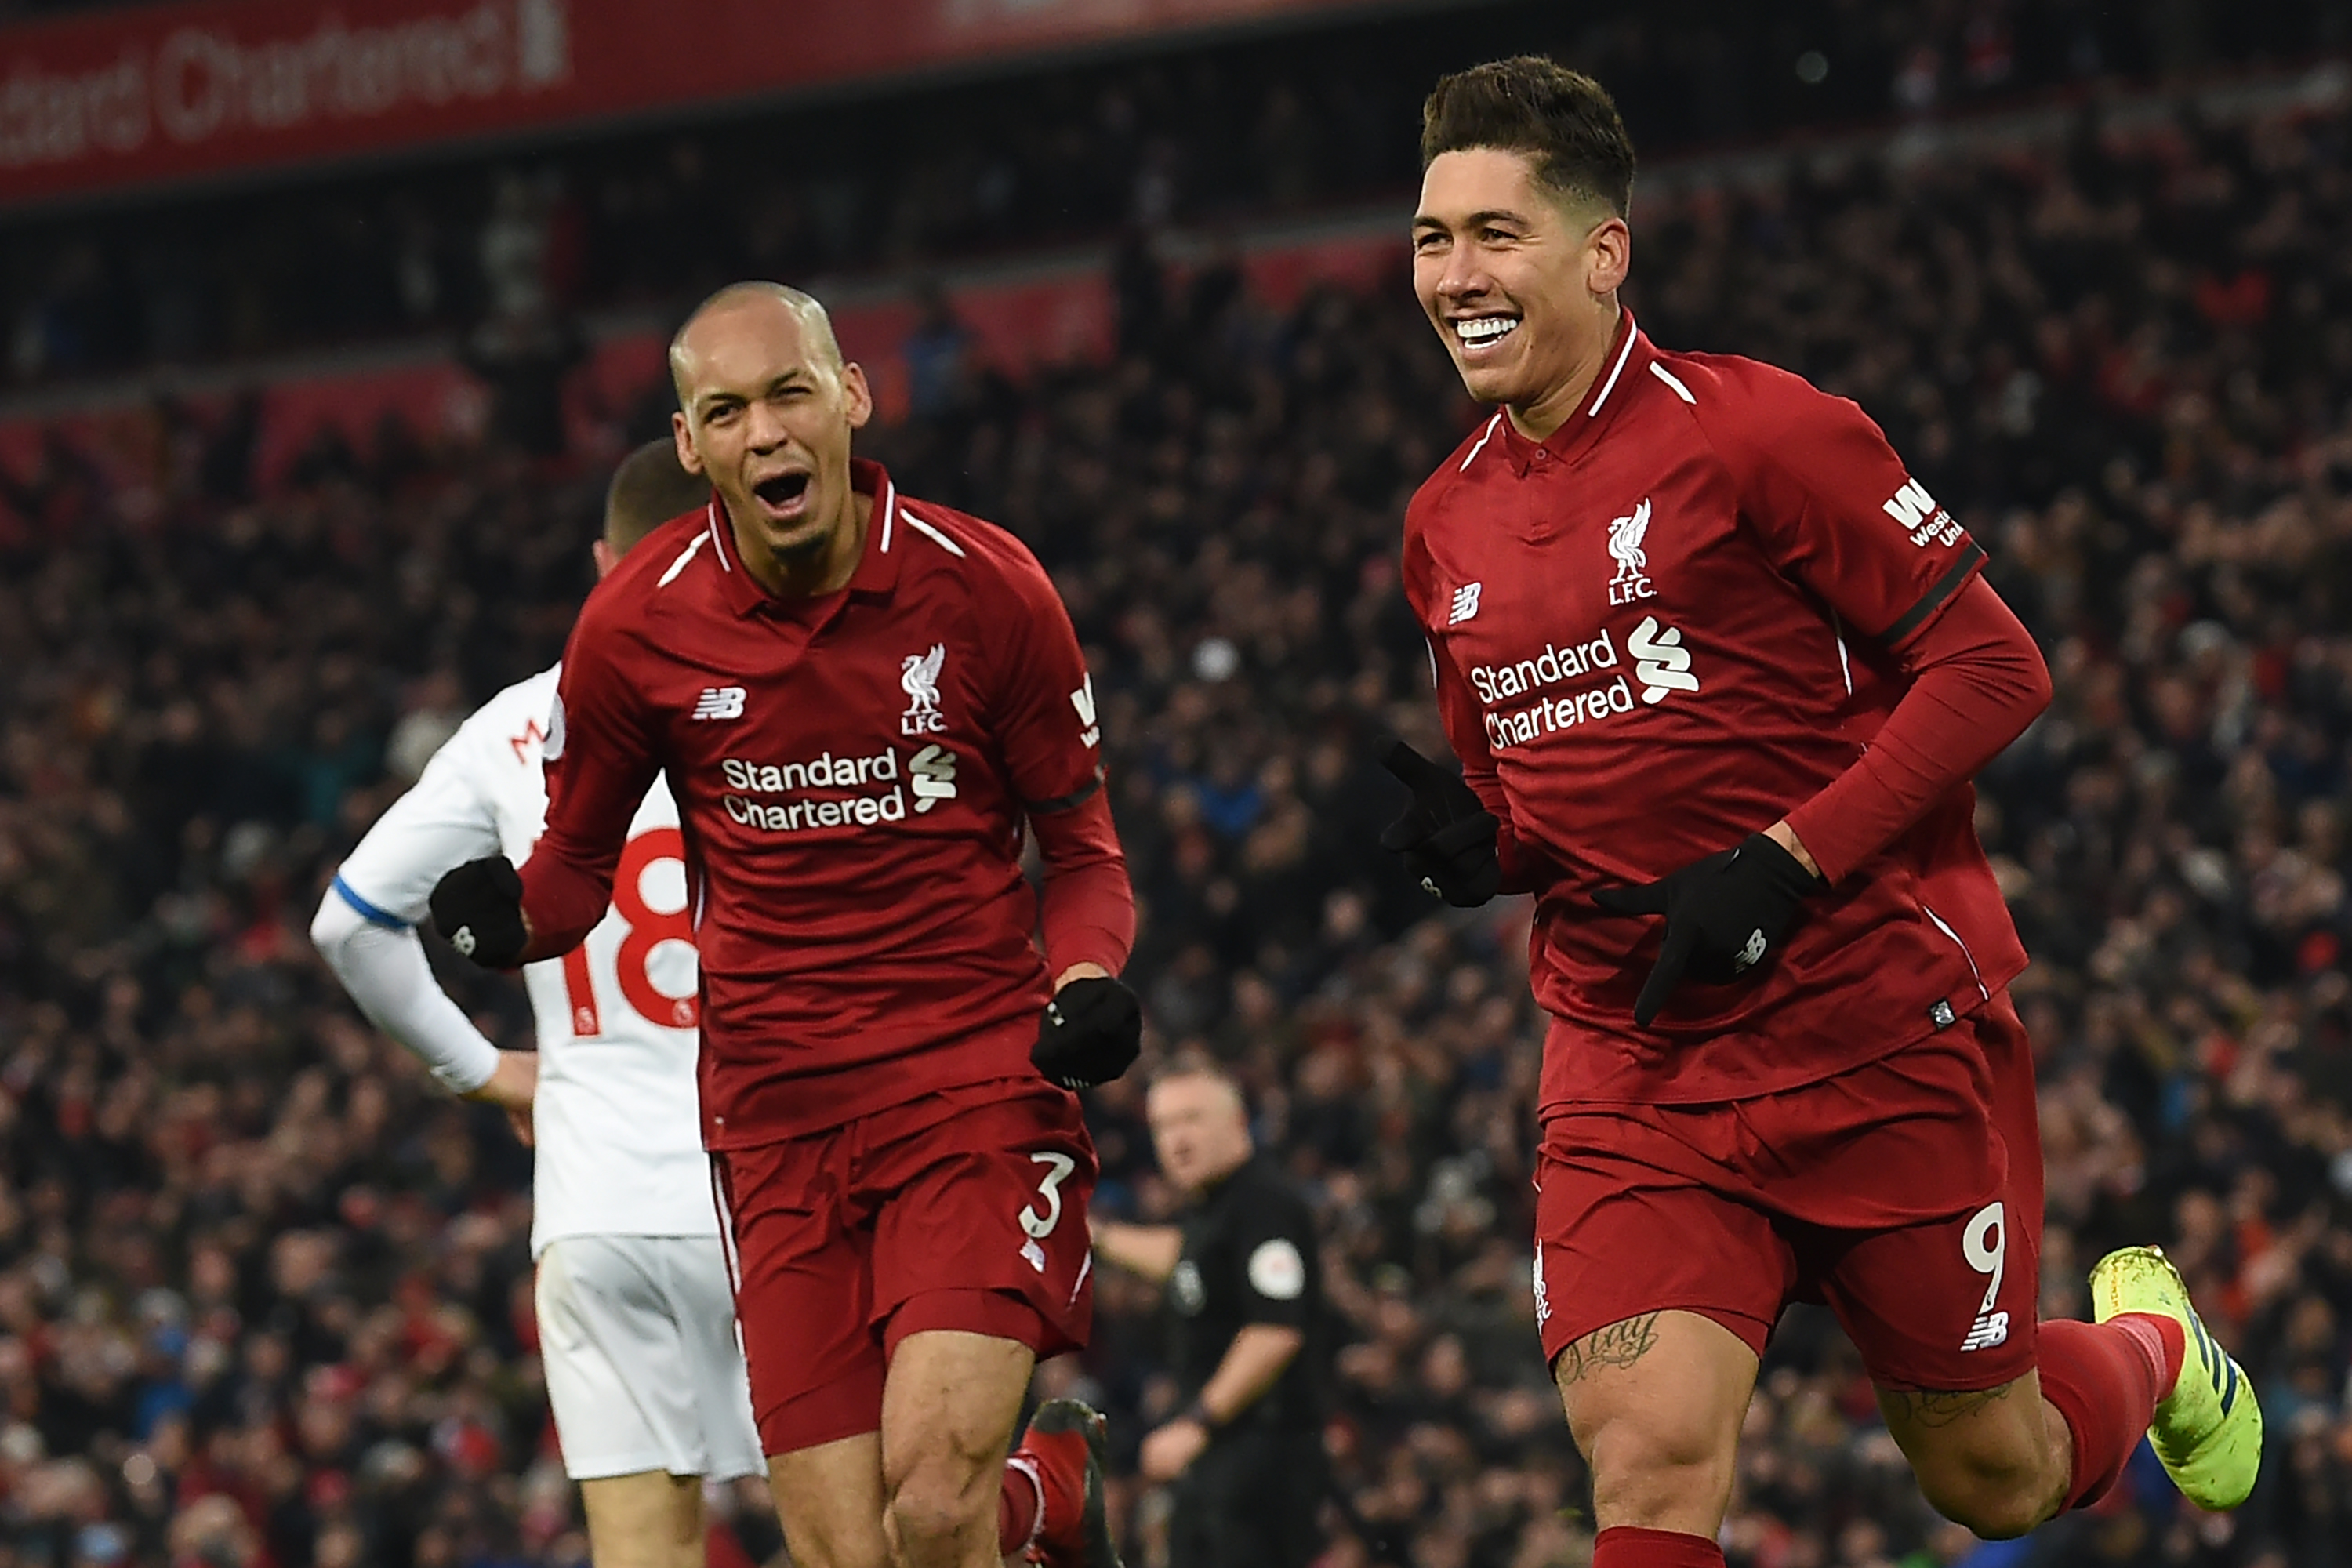 Liverpool's Brazilian midfielder Roberto Firmino (R) celebrates with Liverpool's Brazilian midfielder Fabinho (L) after scoring their second goal during the English Premier League football match between Liverpool and Crystal Palace at Anfield in Liverpool, north west England on January 19, 2019. (Photo by Paul ELLIS / AFP) / RESTRICTED TO EDITORIAL USE. No use with unauthorized audio, video, data, fixture lists, club/league logos or 'live' services. Online in-match use limited to 120 images. An additional 40 images may be used in extra time. No video emulation. Social media in-match use limited to 120 images. An additional 40 images may be used in extra time. No use in betting publications, games or single club/league/player publications. /         (Photo credit should read PAUL ELLIS/AFP/Getty Images)